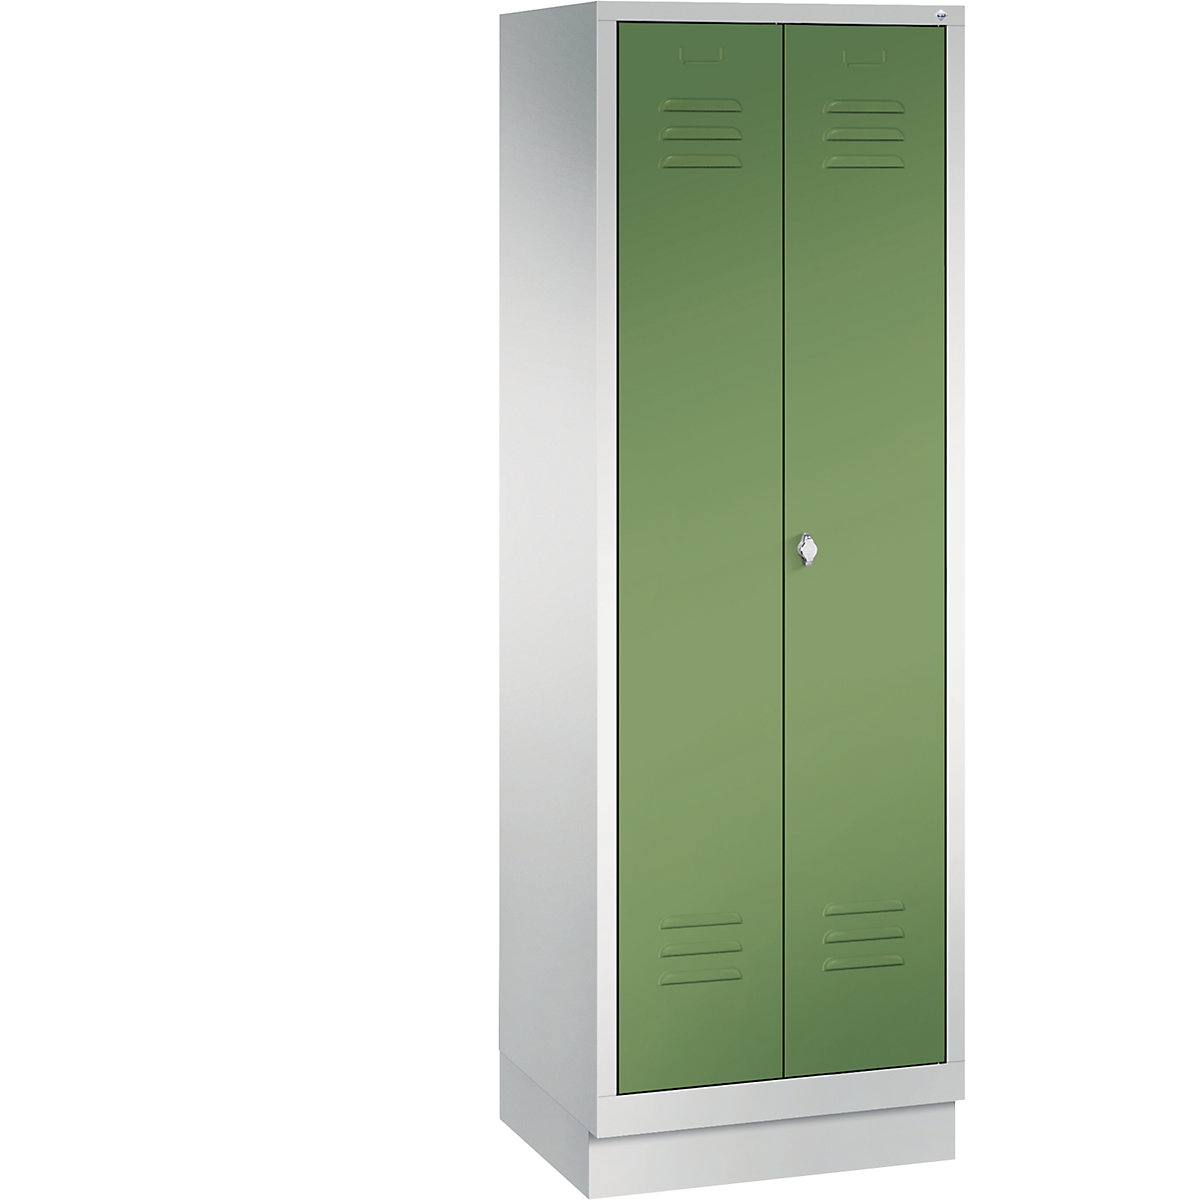 CLASSIC cloakroom locker with plinth, doors close in the middle – C+P, 2 compartments, compartment width 300 mm, light grey / reseda green-6